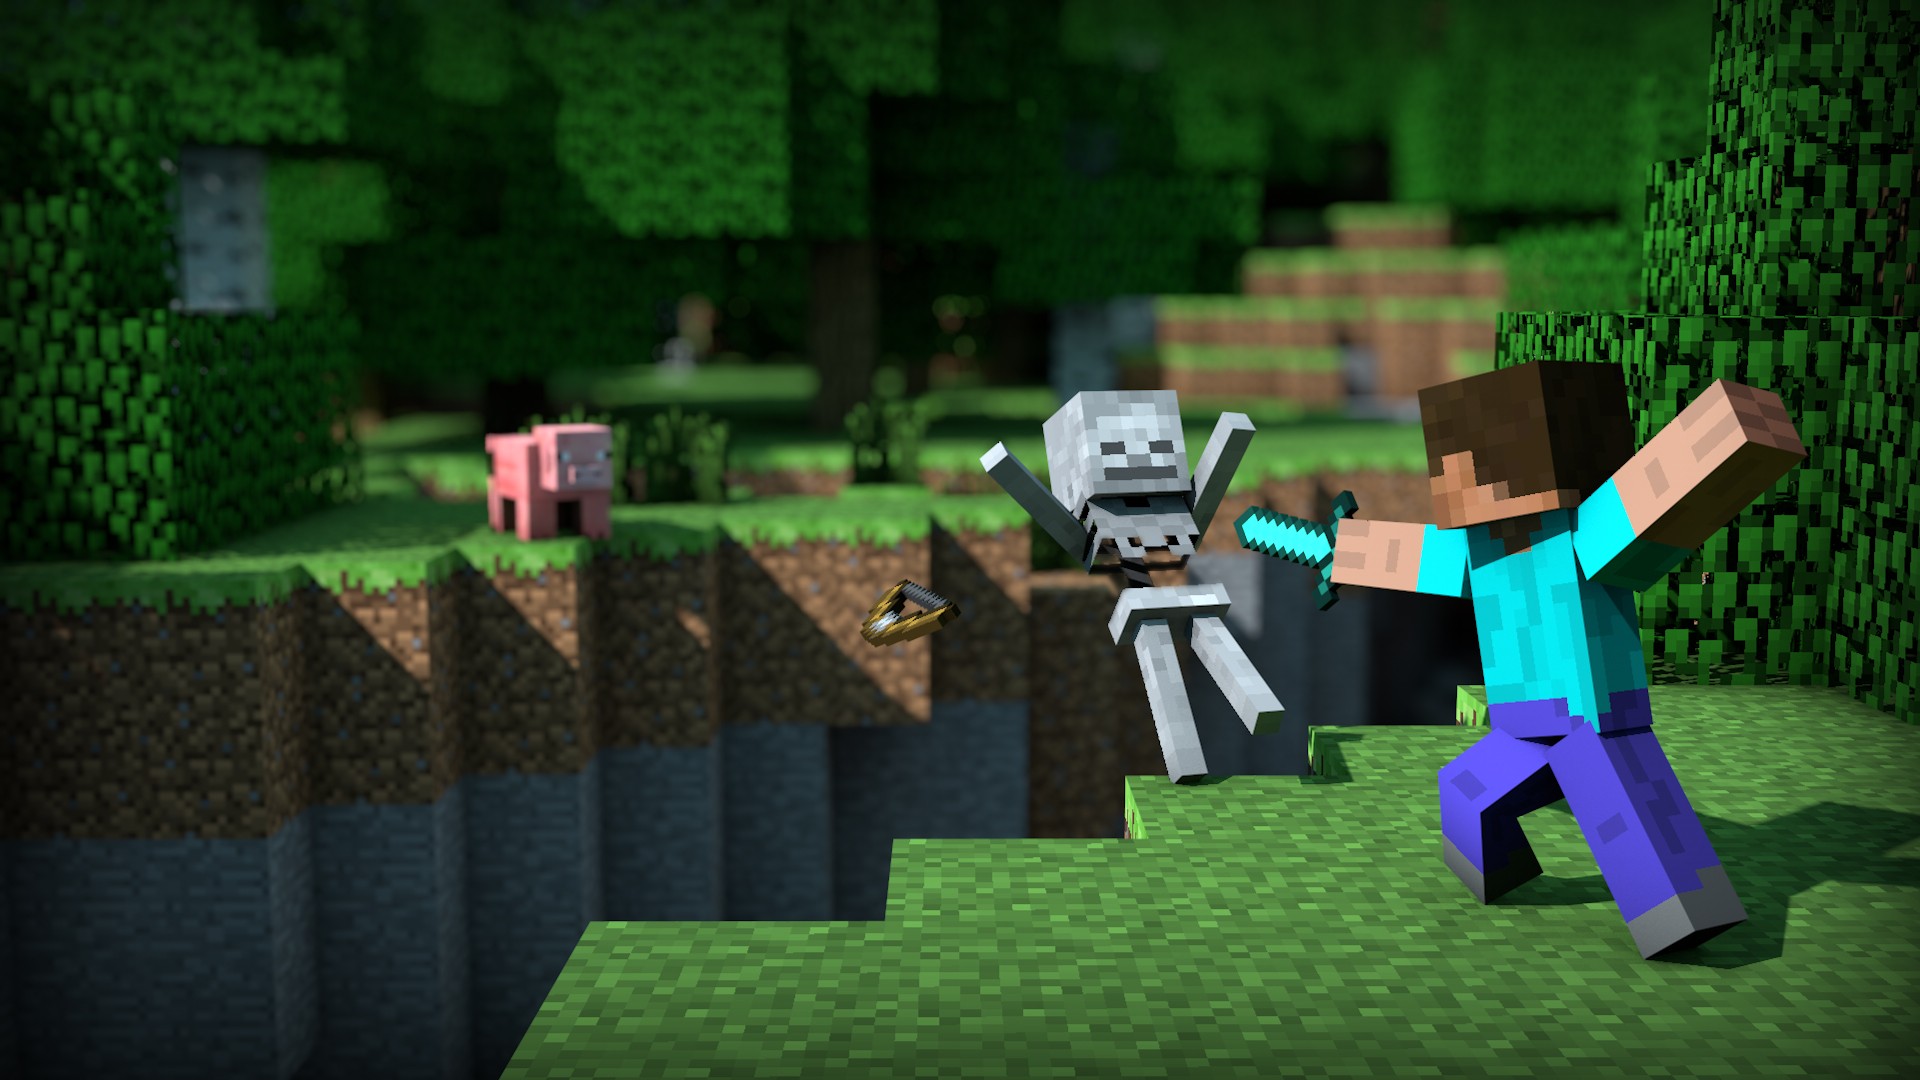 Steve hitting a skeleton with a diamond sword while a pig watches by Murshtin